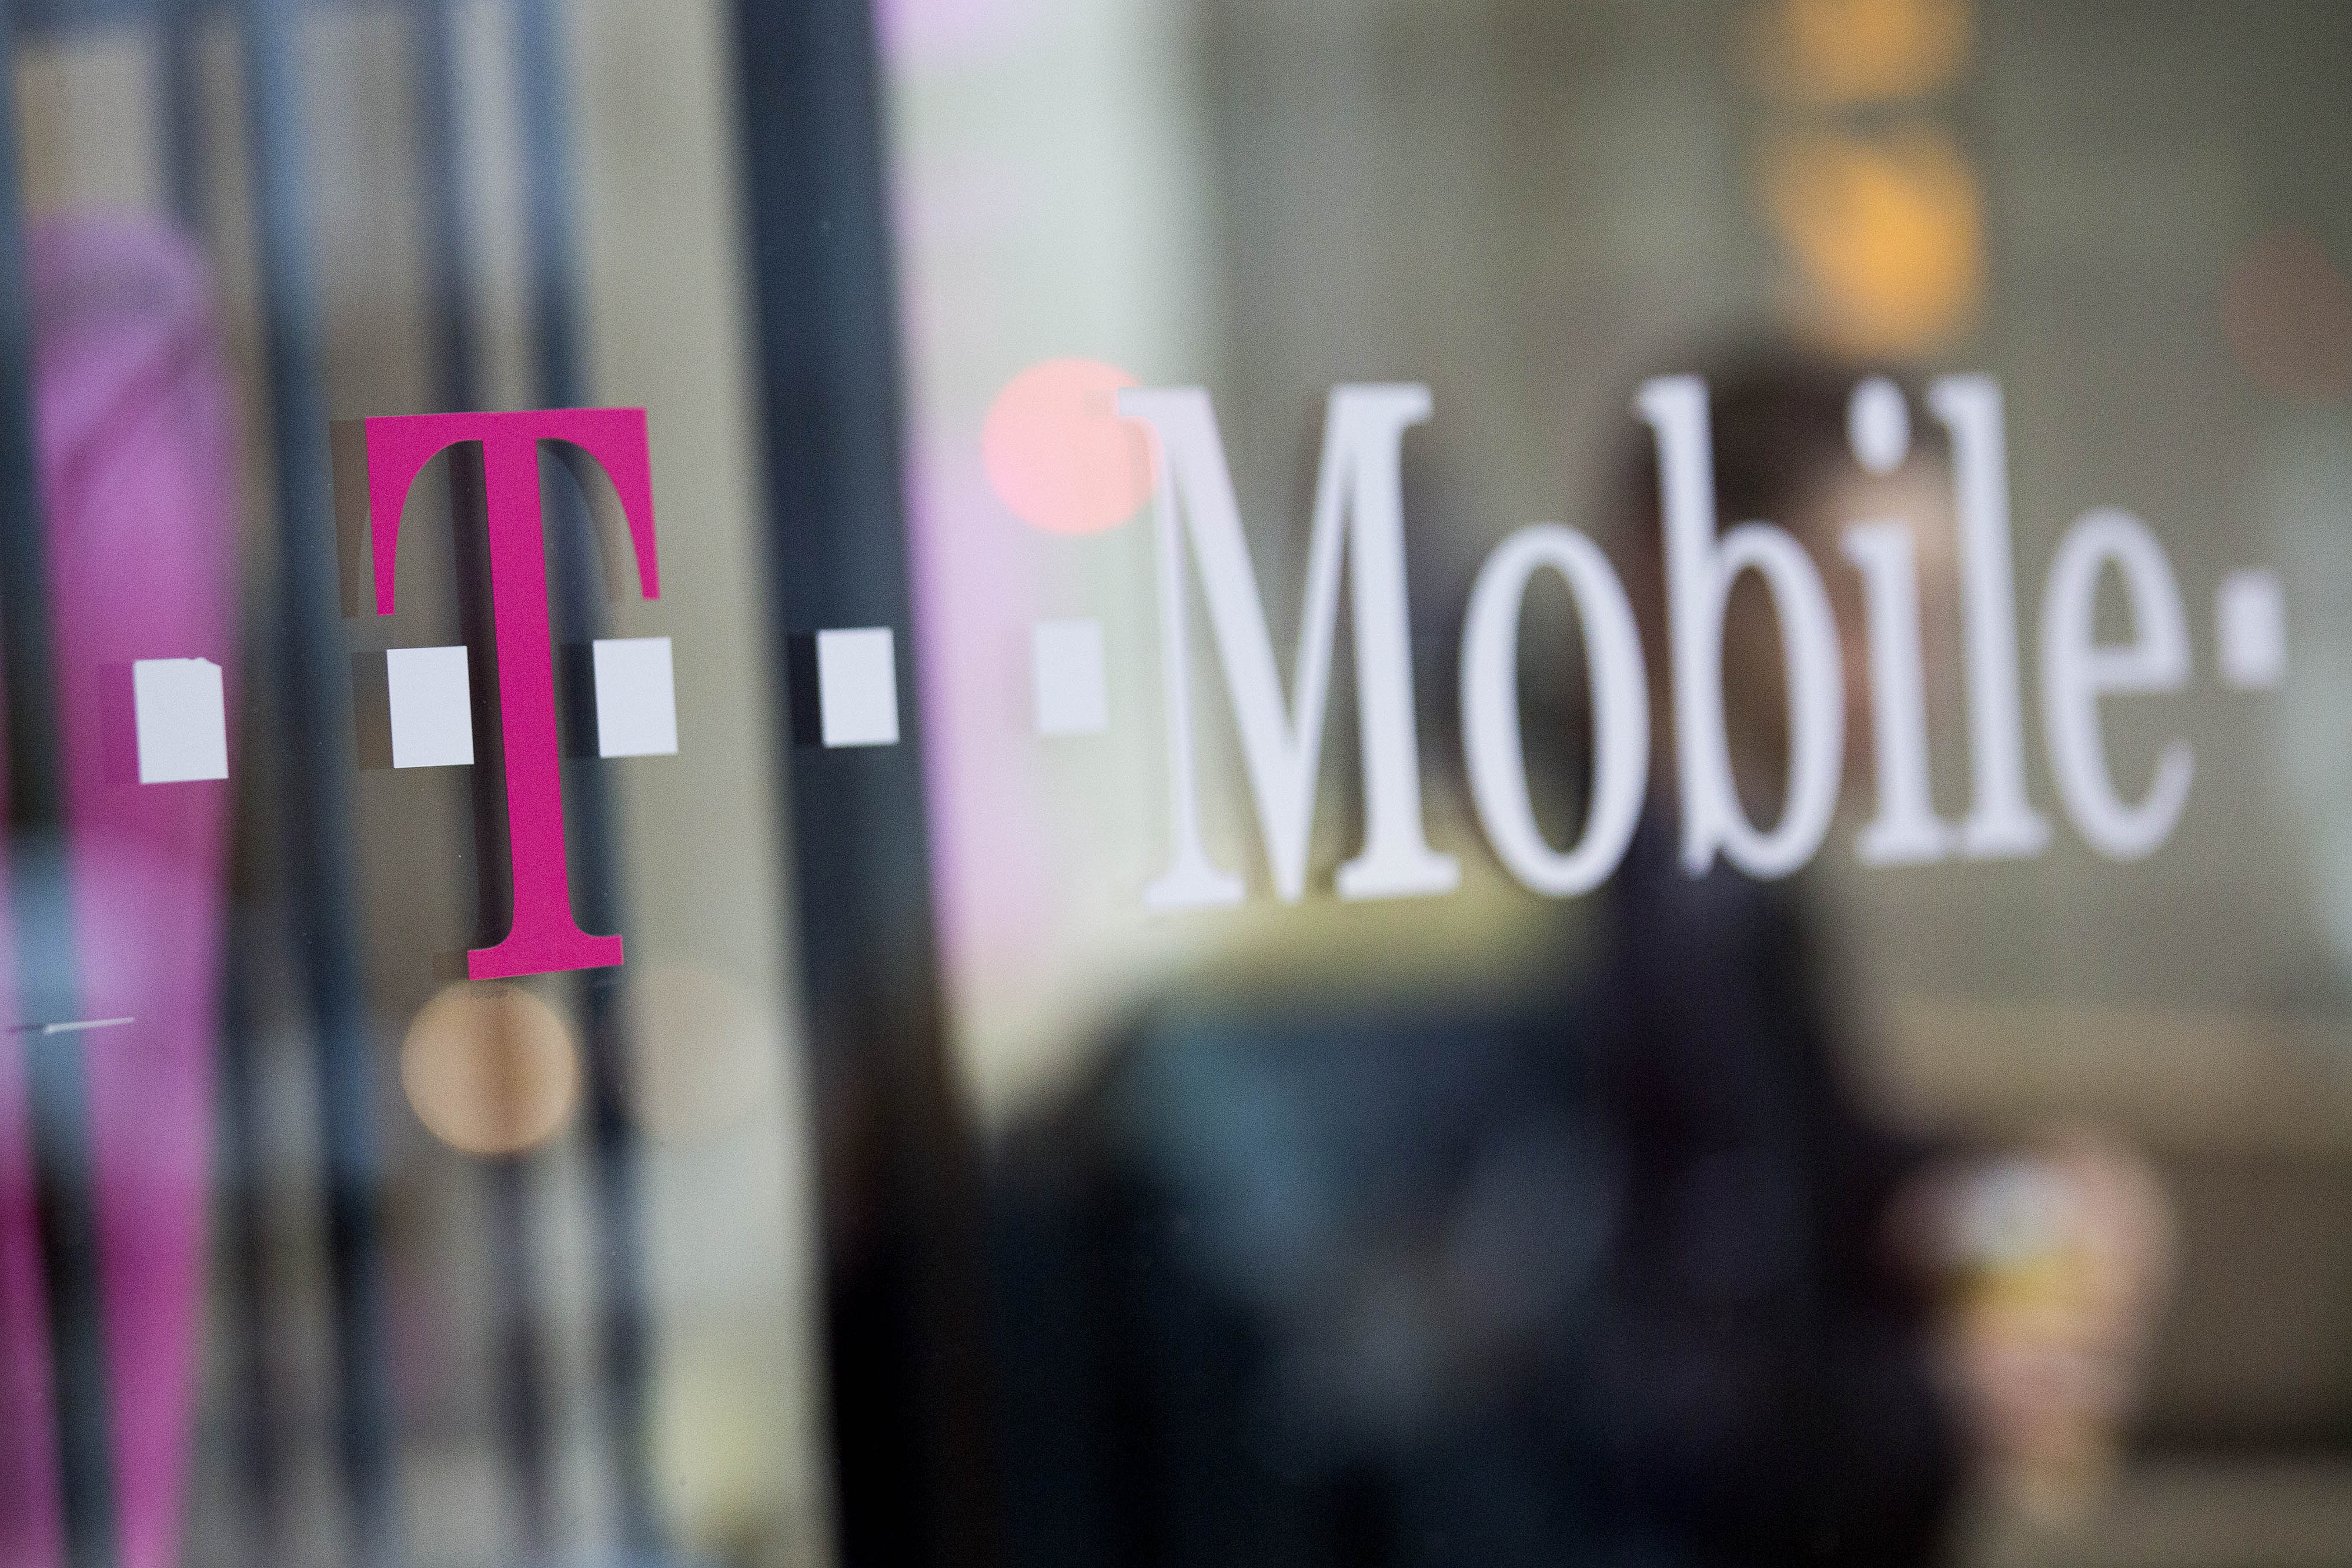 T-Mobile US Inc. signage is displayed in the window of a retail store in Washington, D.C., on Oct. 23, 2014. (Bloomberg via Getty Images)